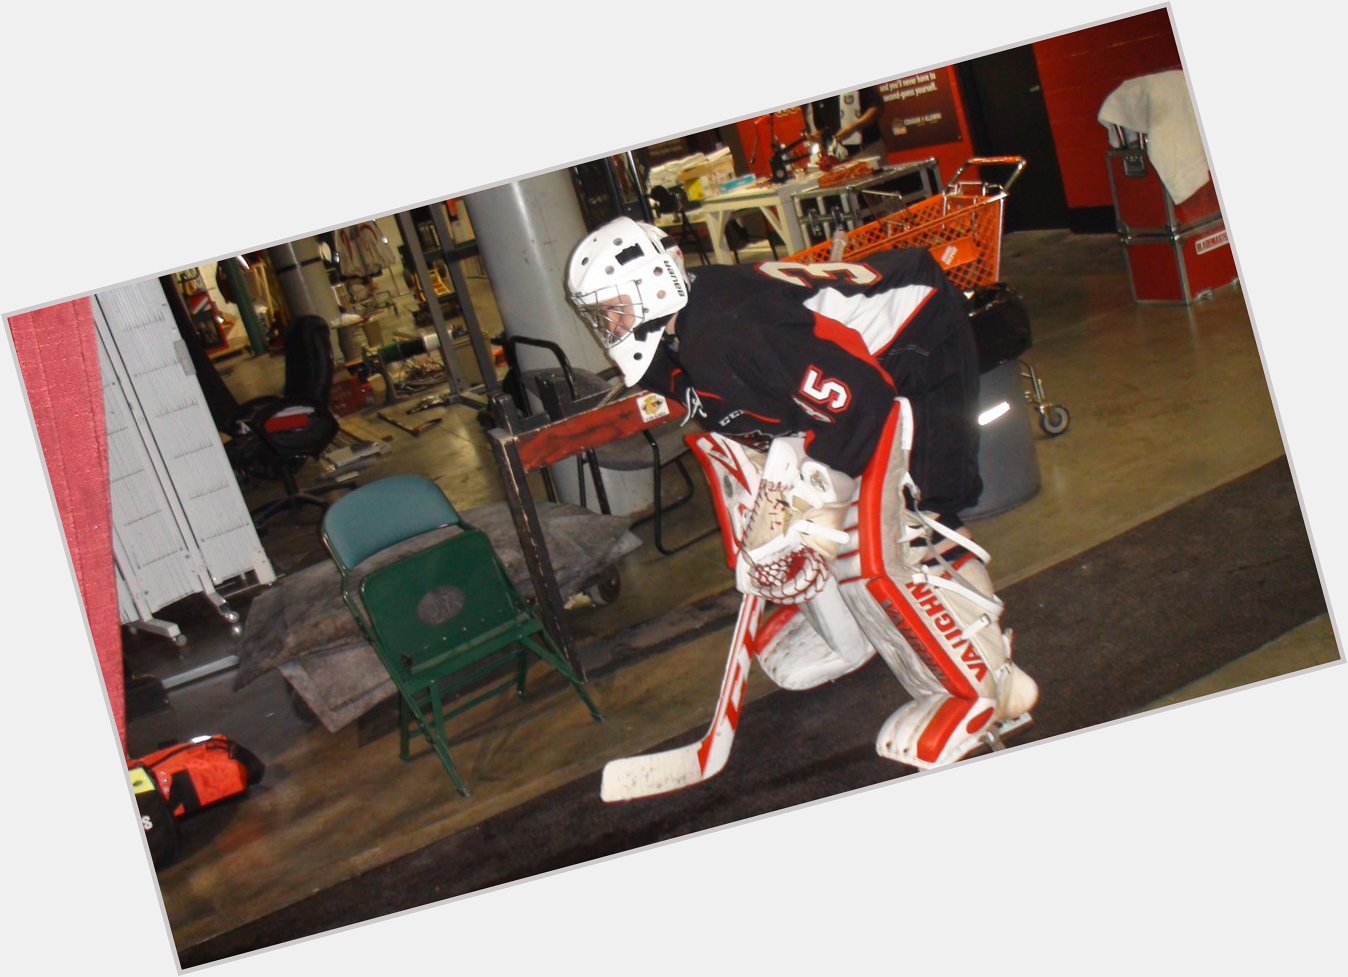 Happy birthday today to Prince George Cougars goaltending prospect Matt Kustra! Have a great day Matty! 